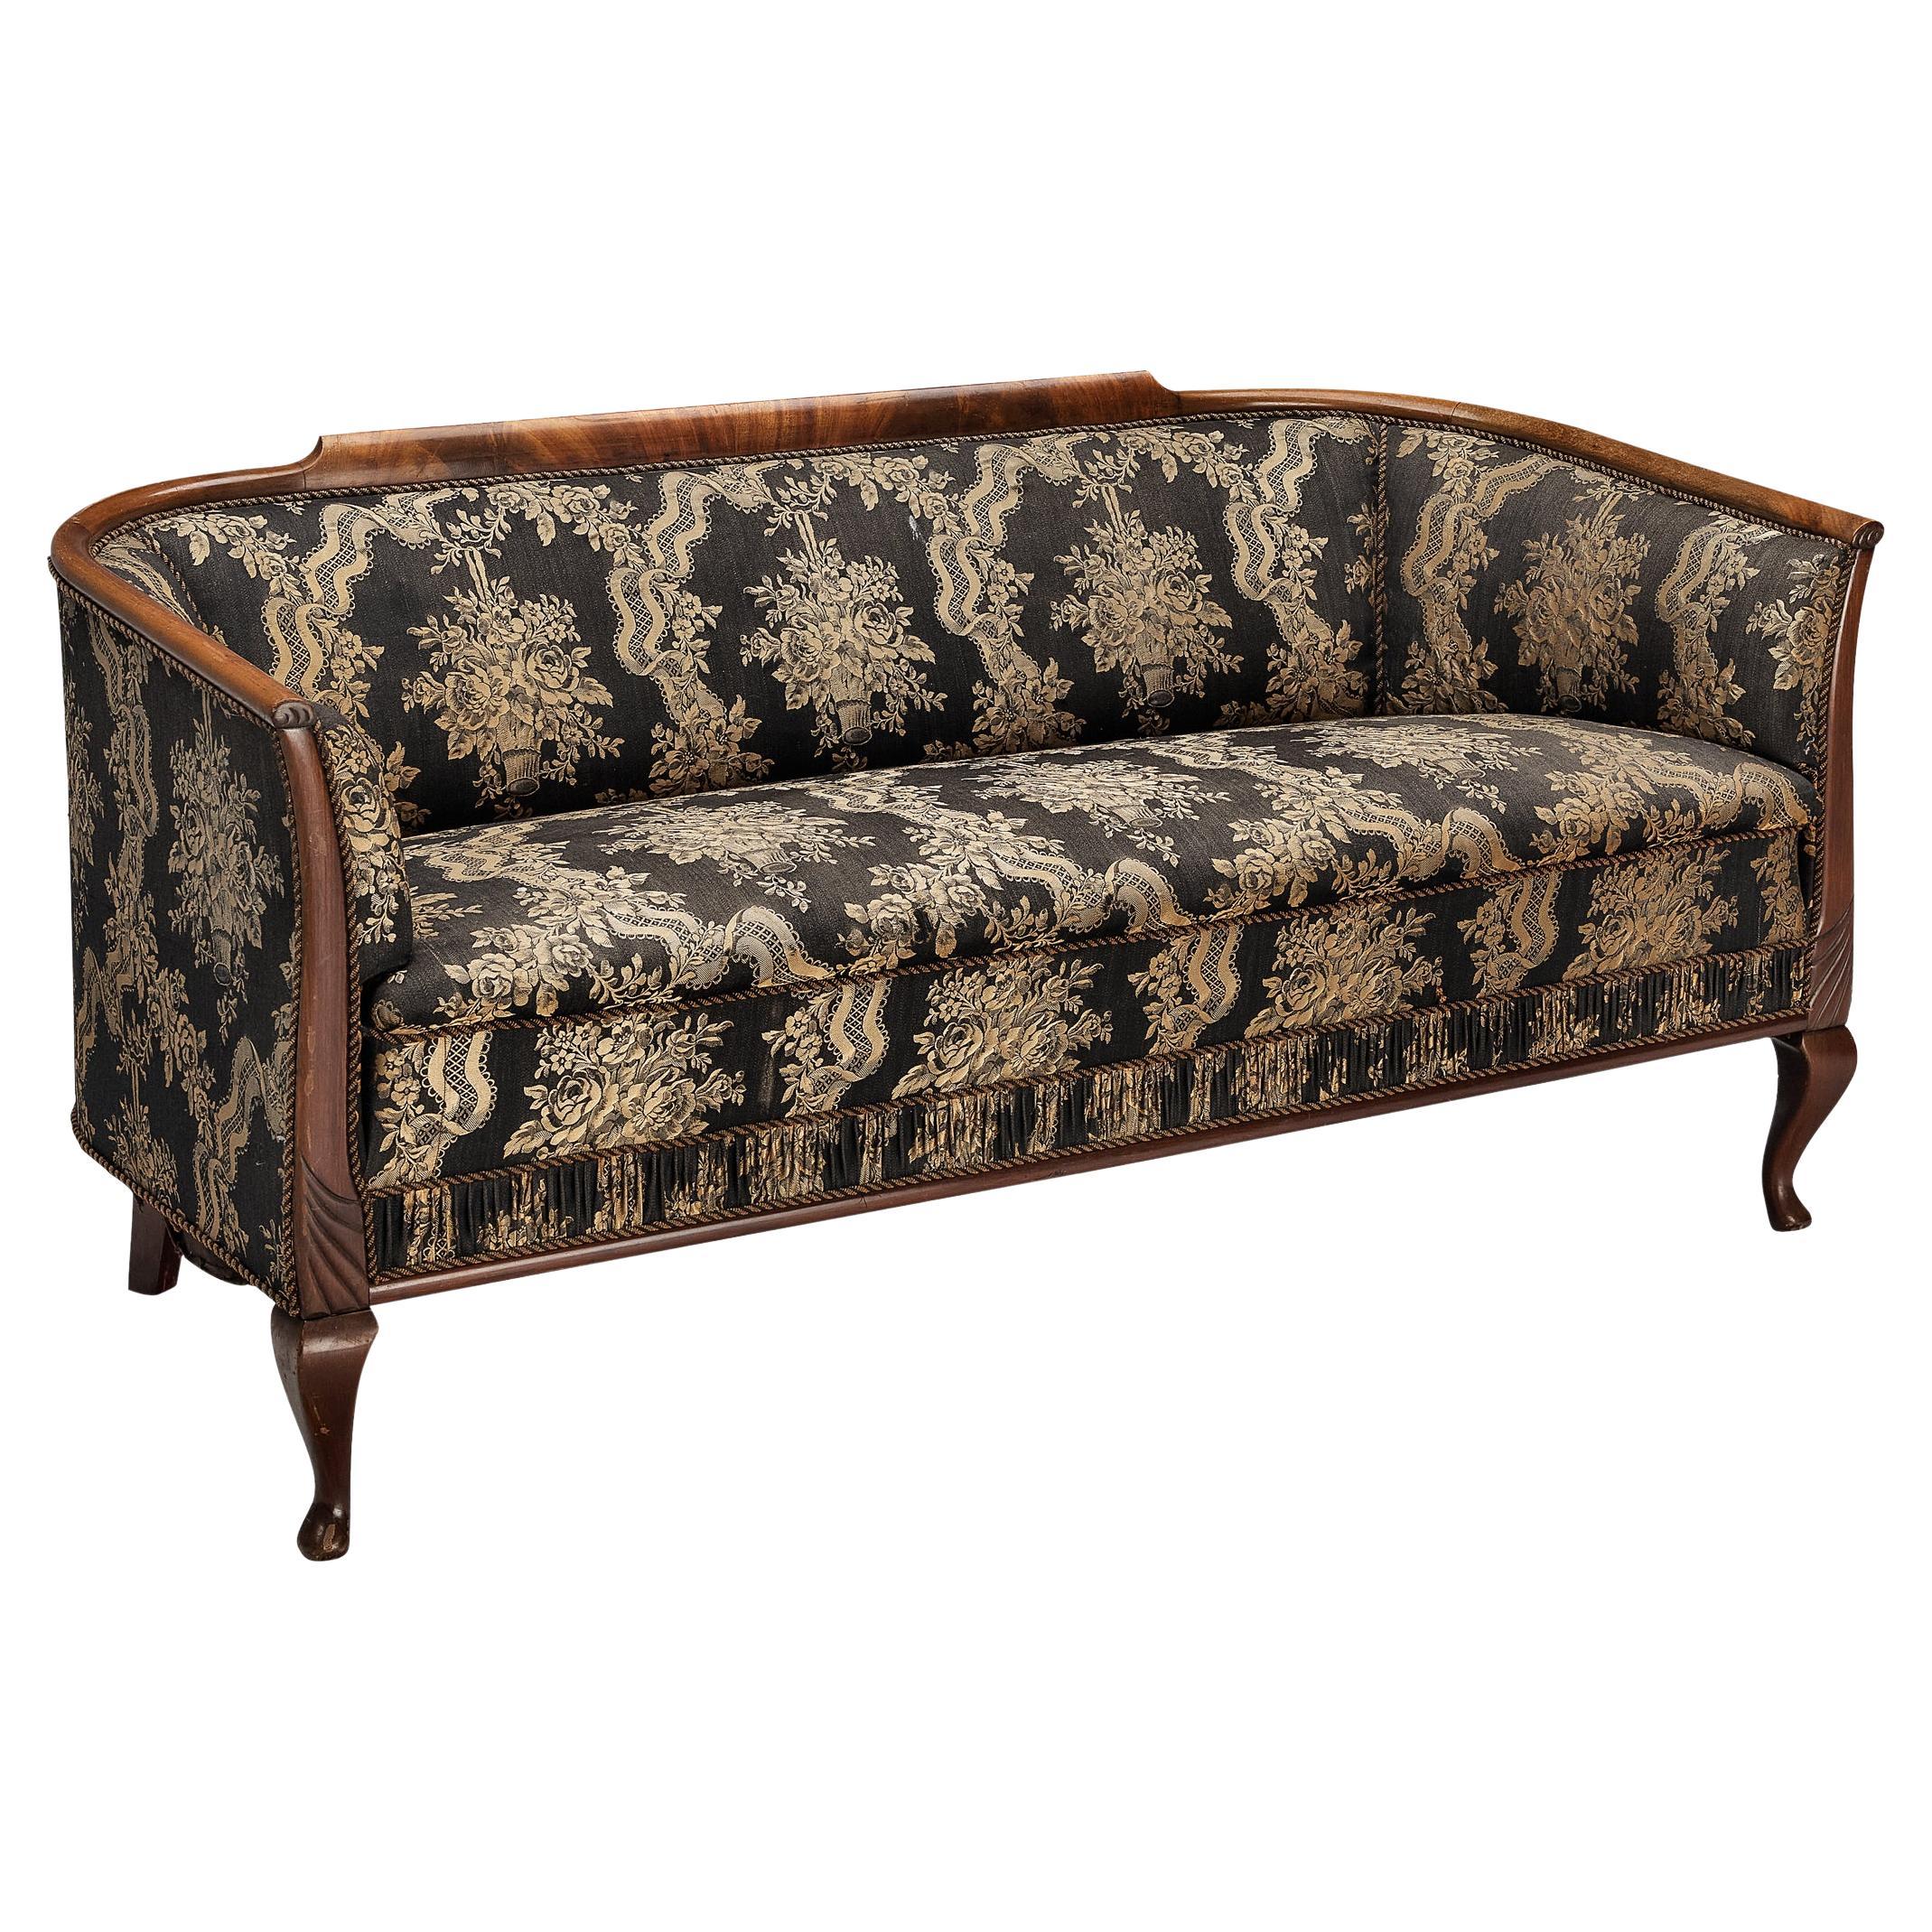 Danish Settee in Floral Upholstery For Sale